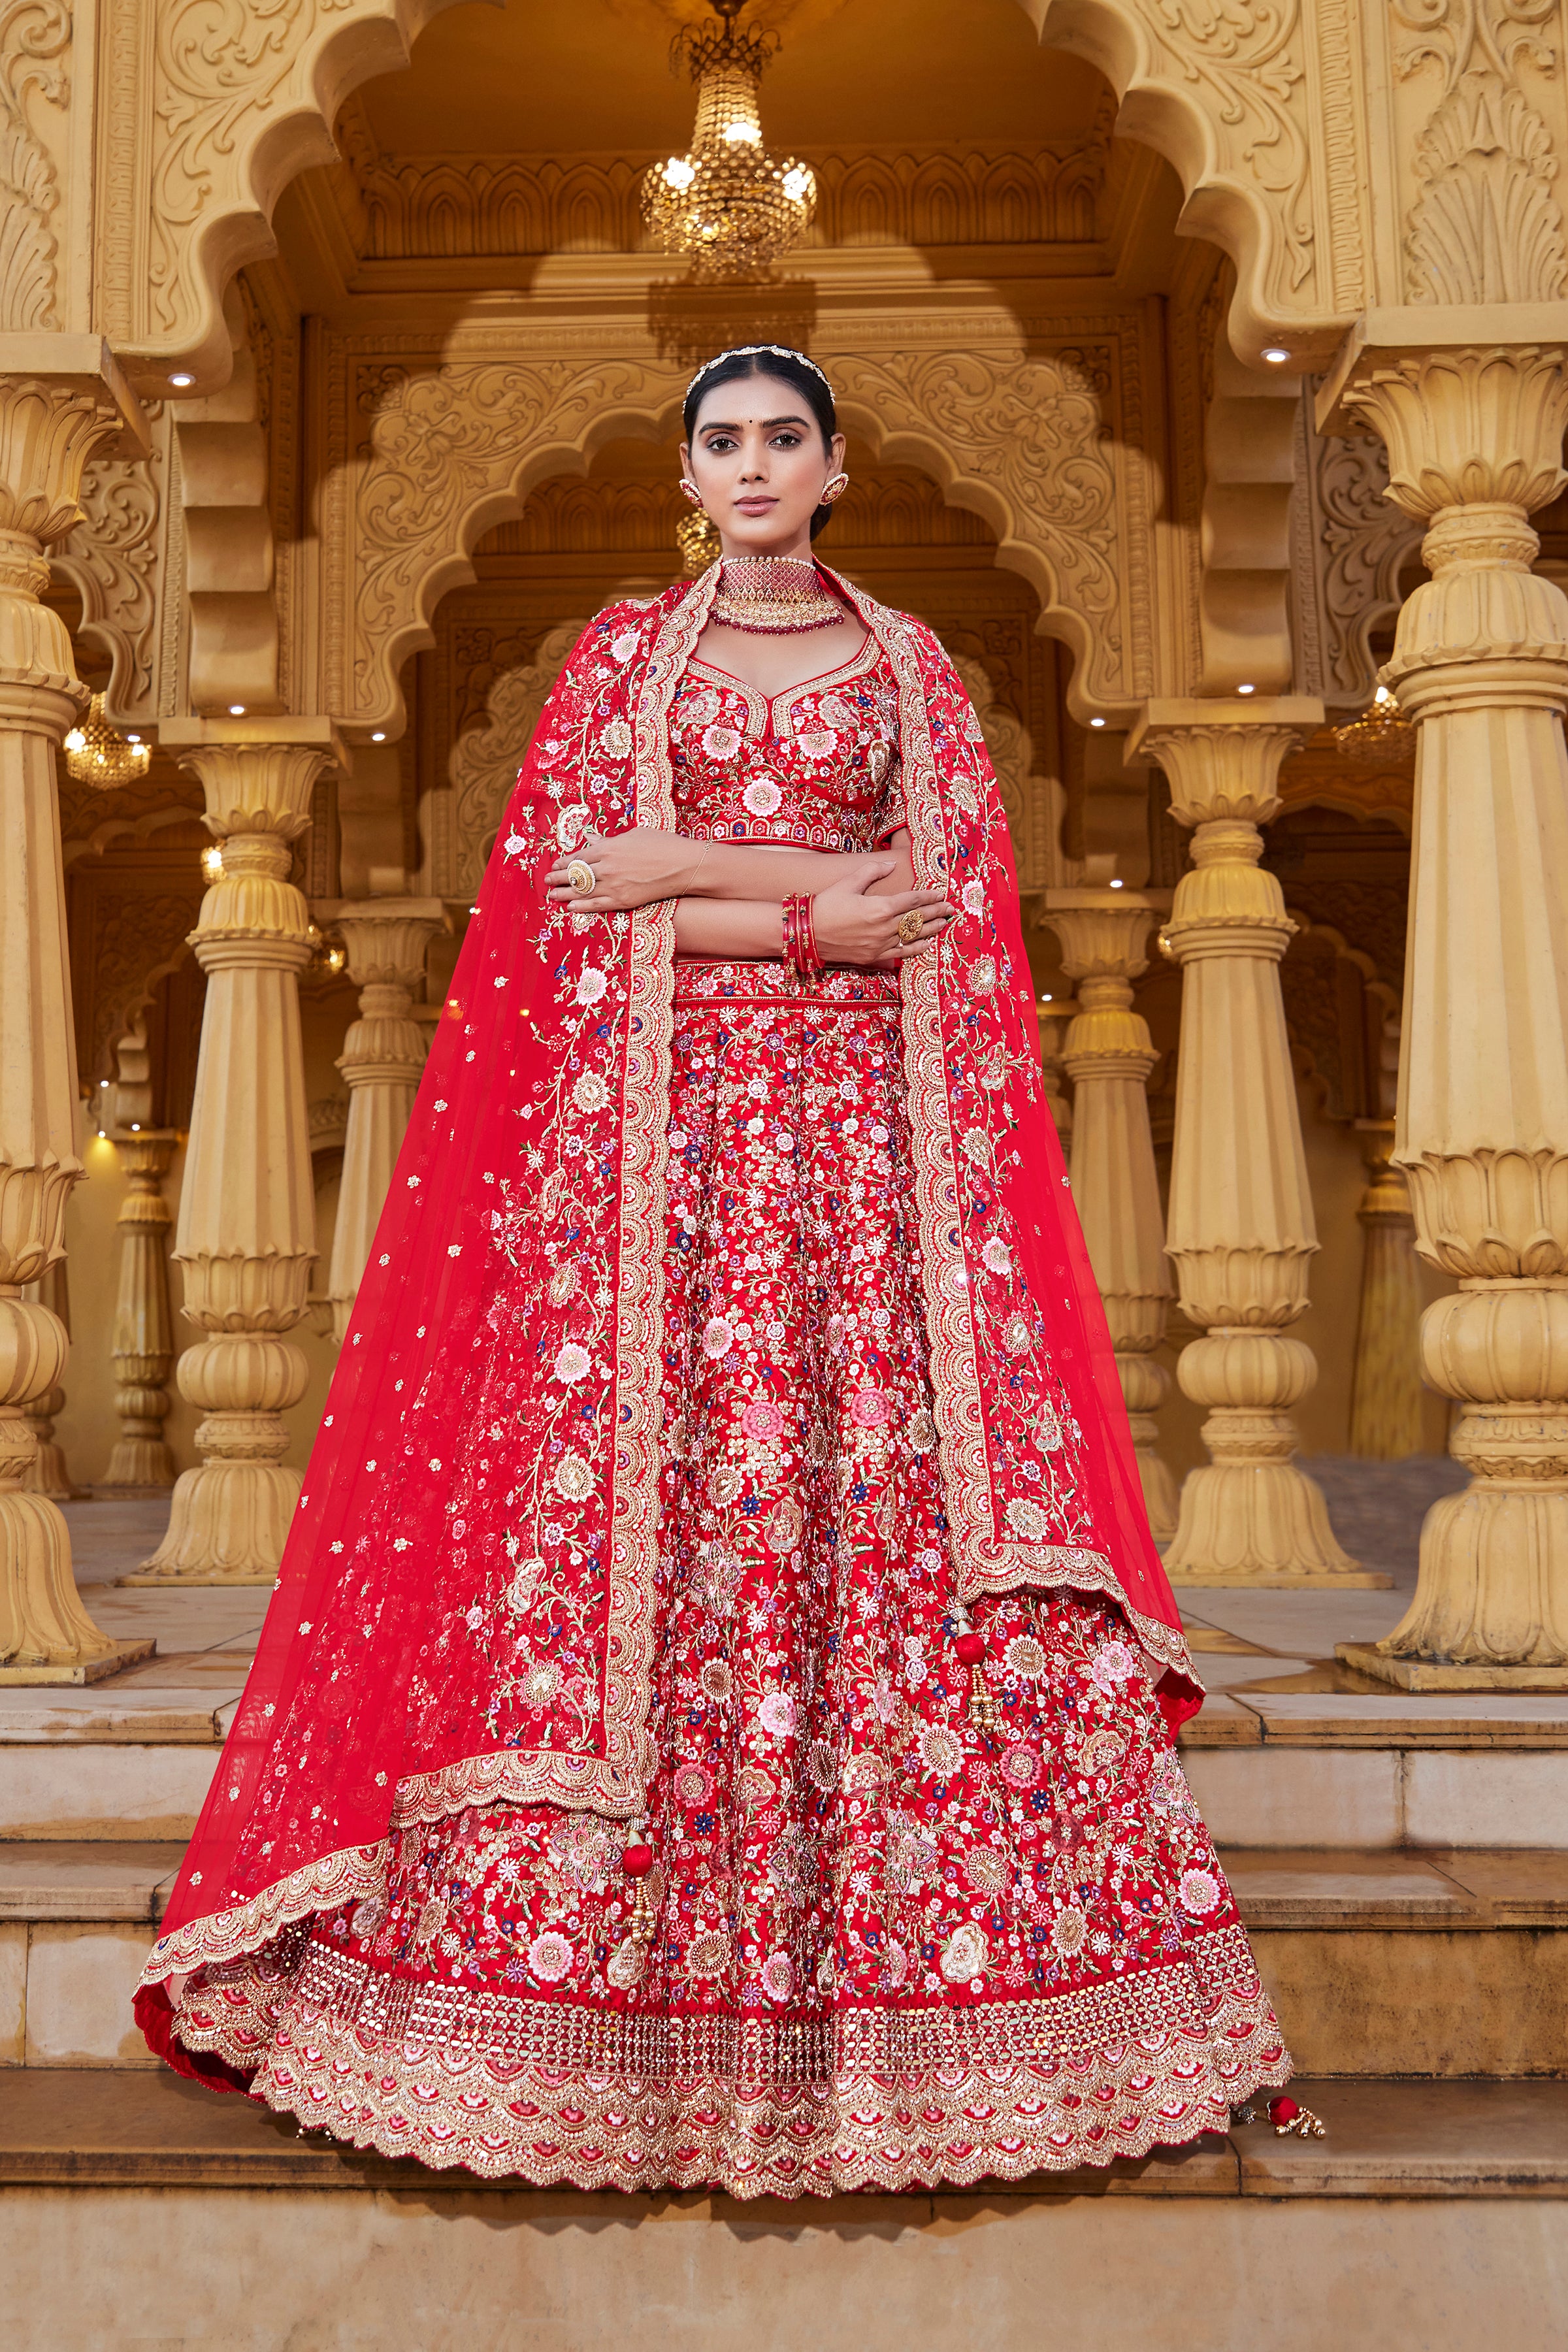 50+ Of The Most Beautiful Bridal Lehengas We Spotted On Real Brides! |  WedMeGood